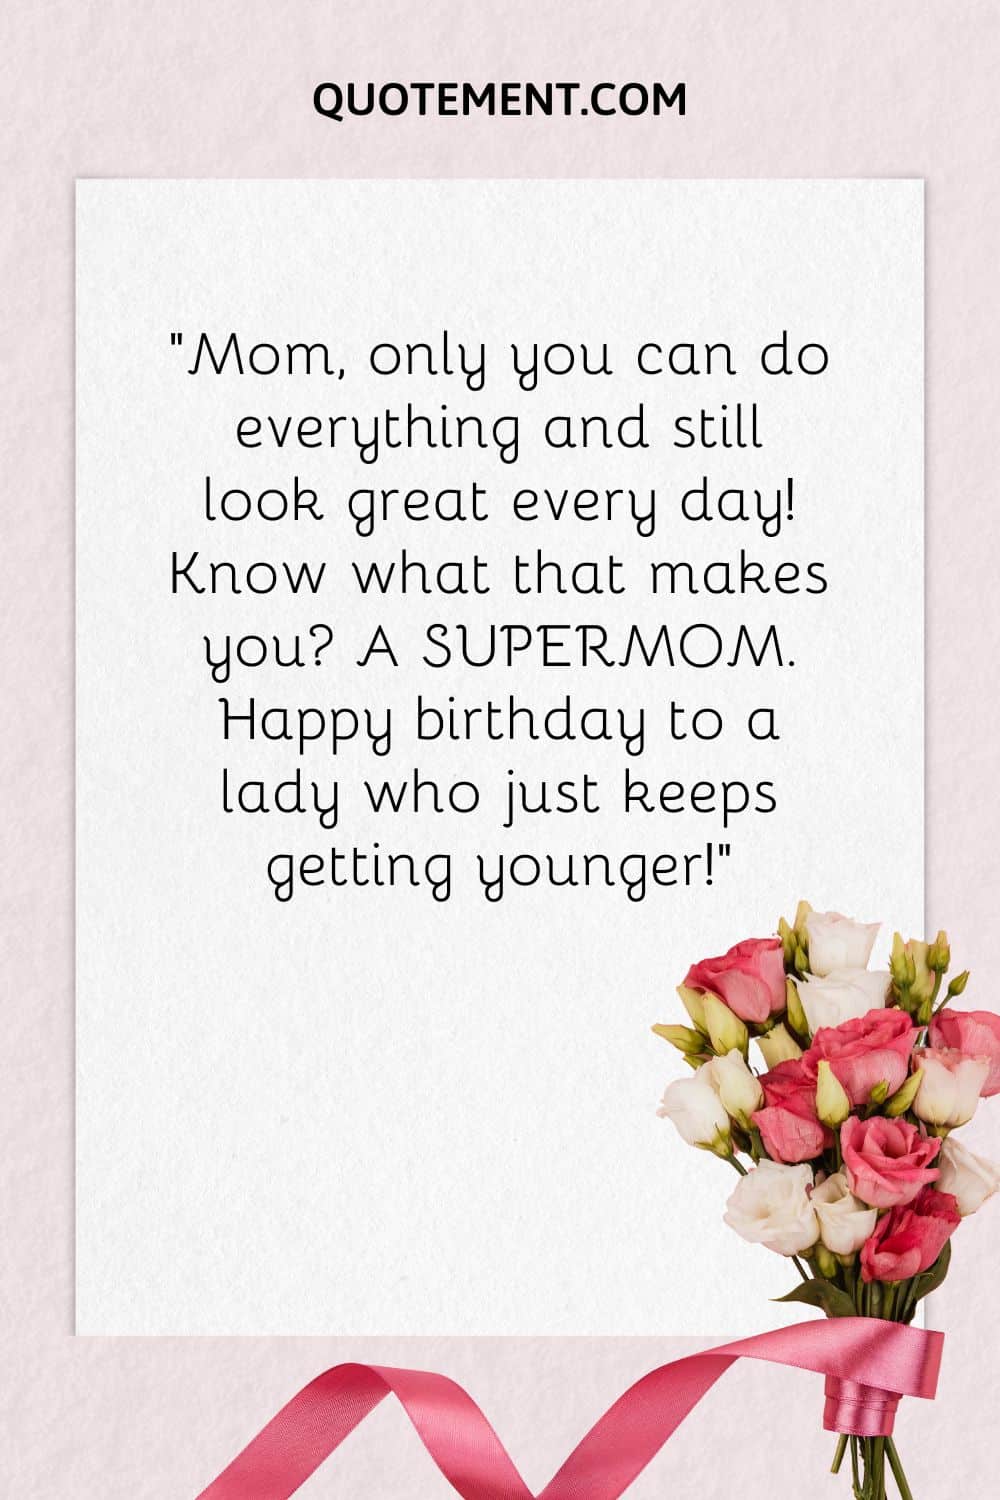 “Mom, only you can do everything and still look great every day! Know what that makes you A SUPERMOM. Happy birthday to a lady who just keeps getting younger!”